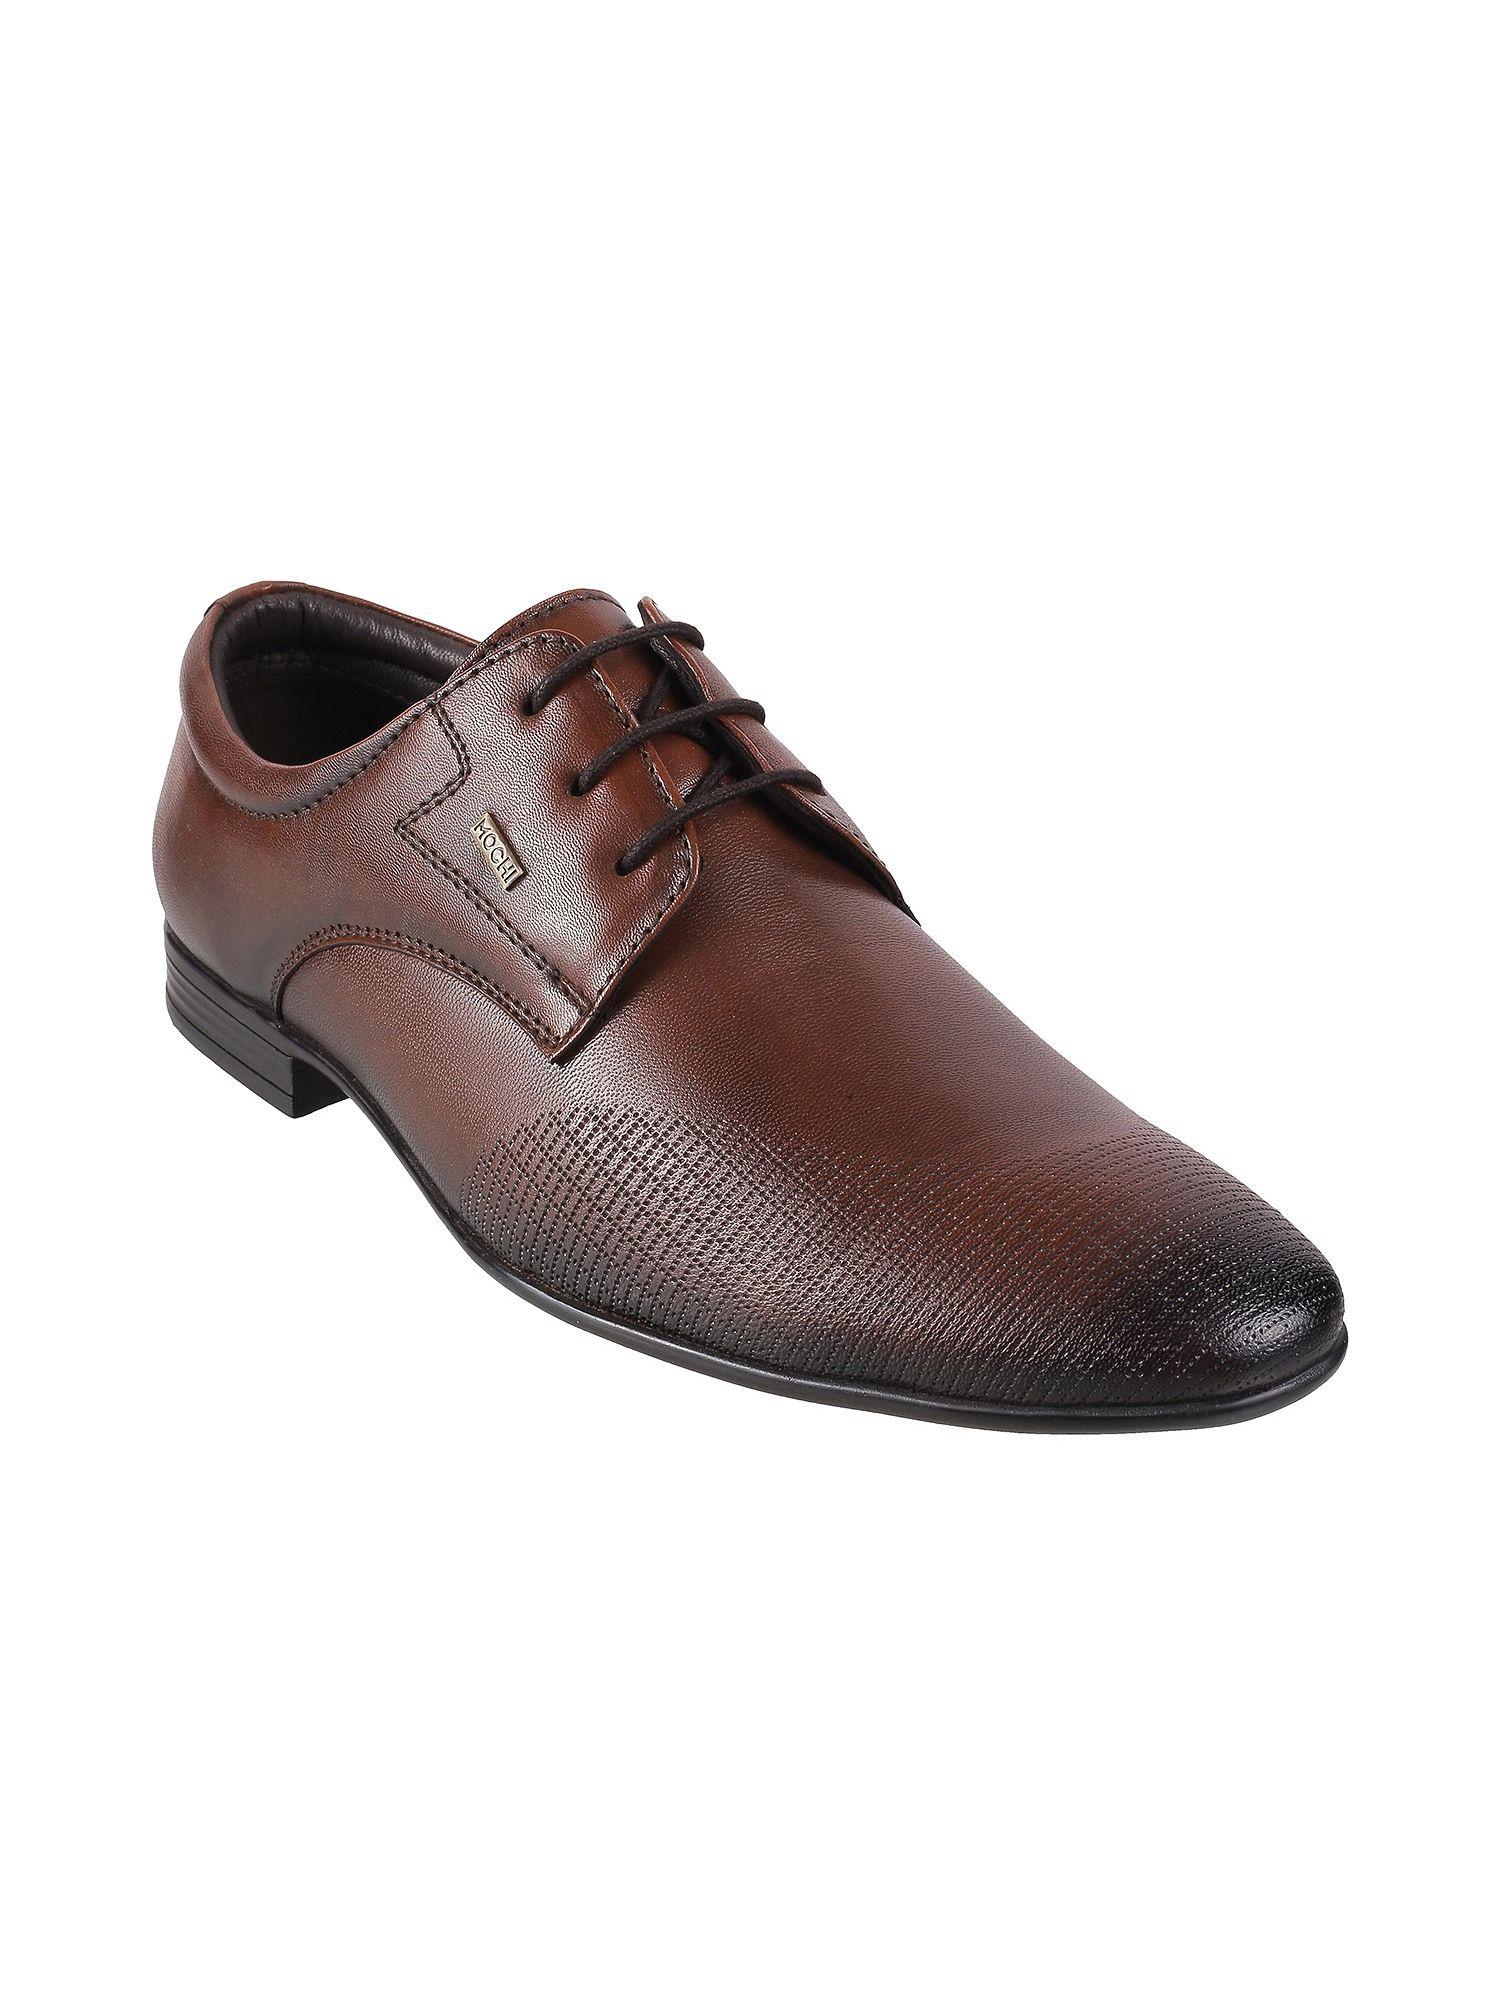 textured tan formal shoes